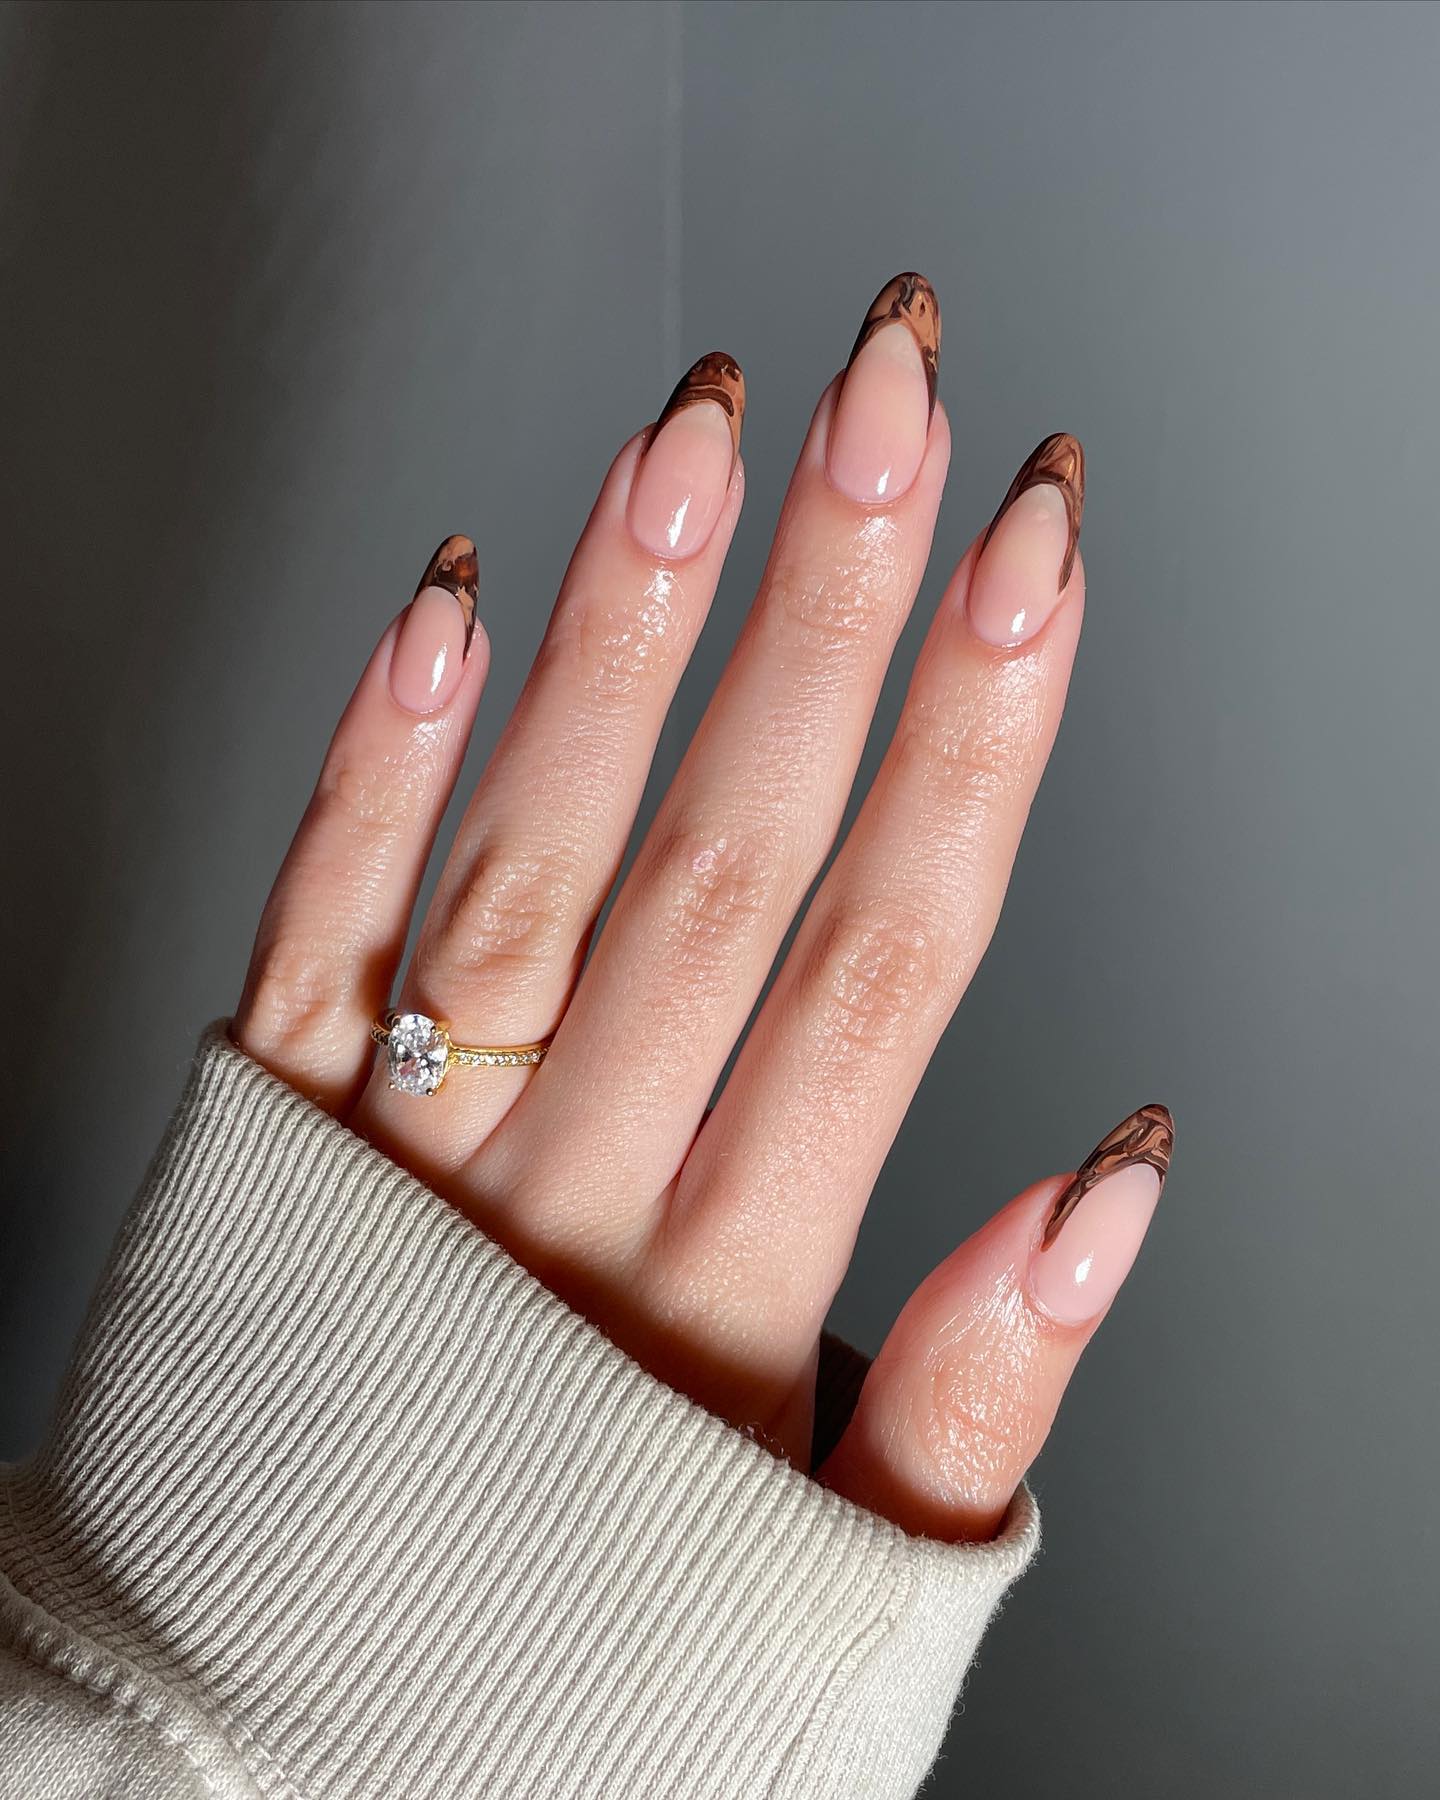 Nails with Brown tips looks like wood